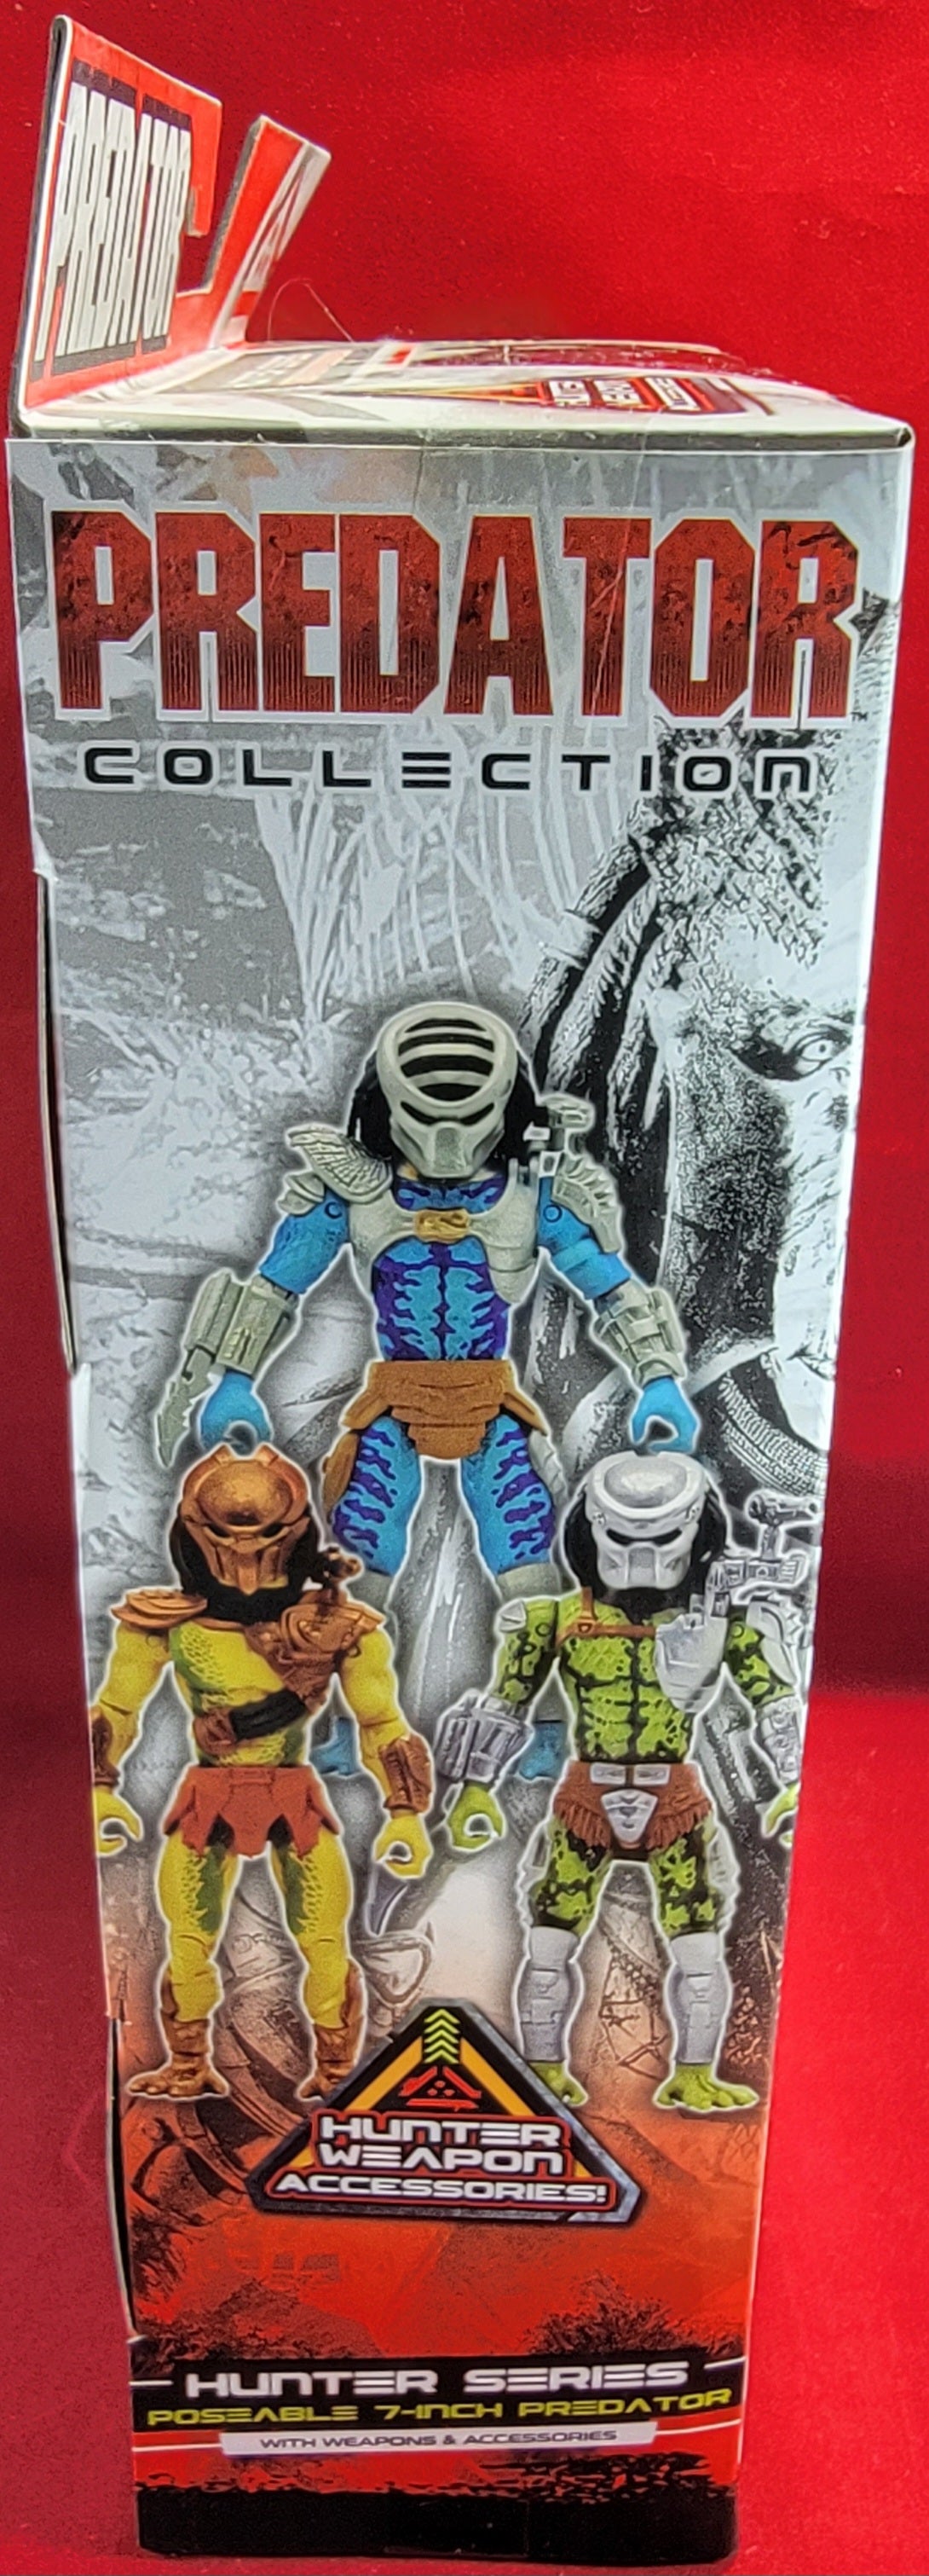 7 inch warrior hunter predator (nib) Brand new fully poseable Wal-Mart exclusive jungle hunter predator. 25 point articulation figure from lanard. Excellent condition.